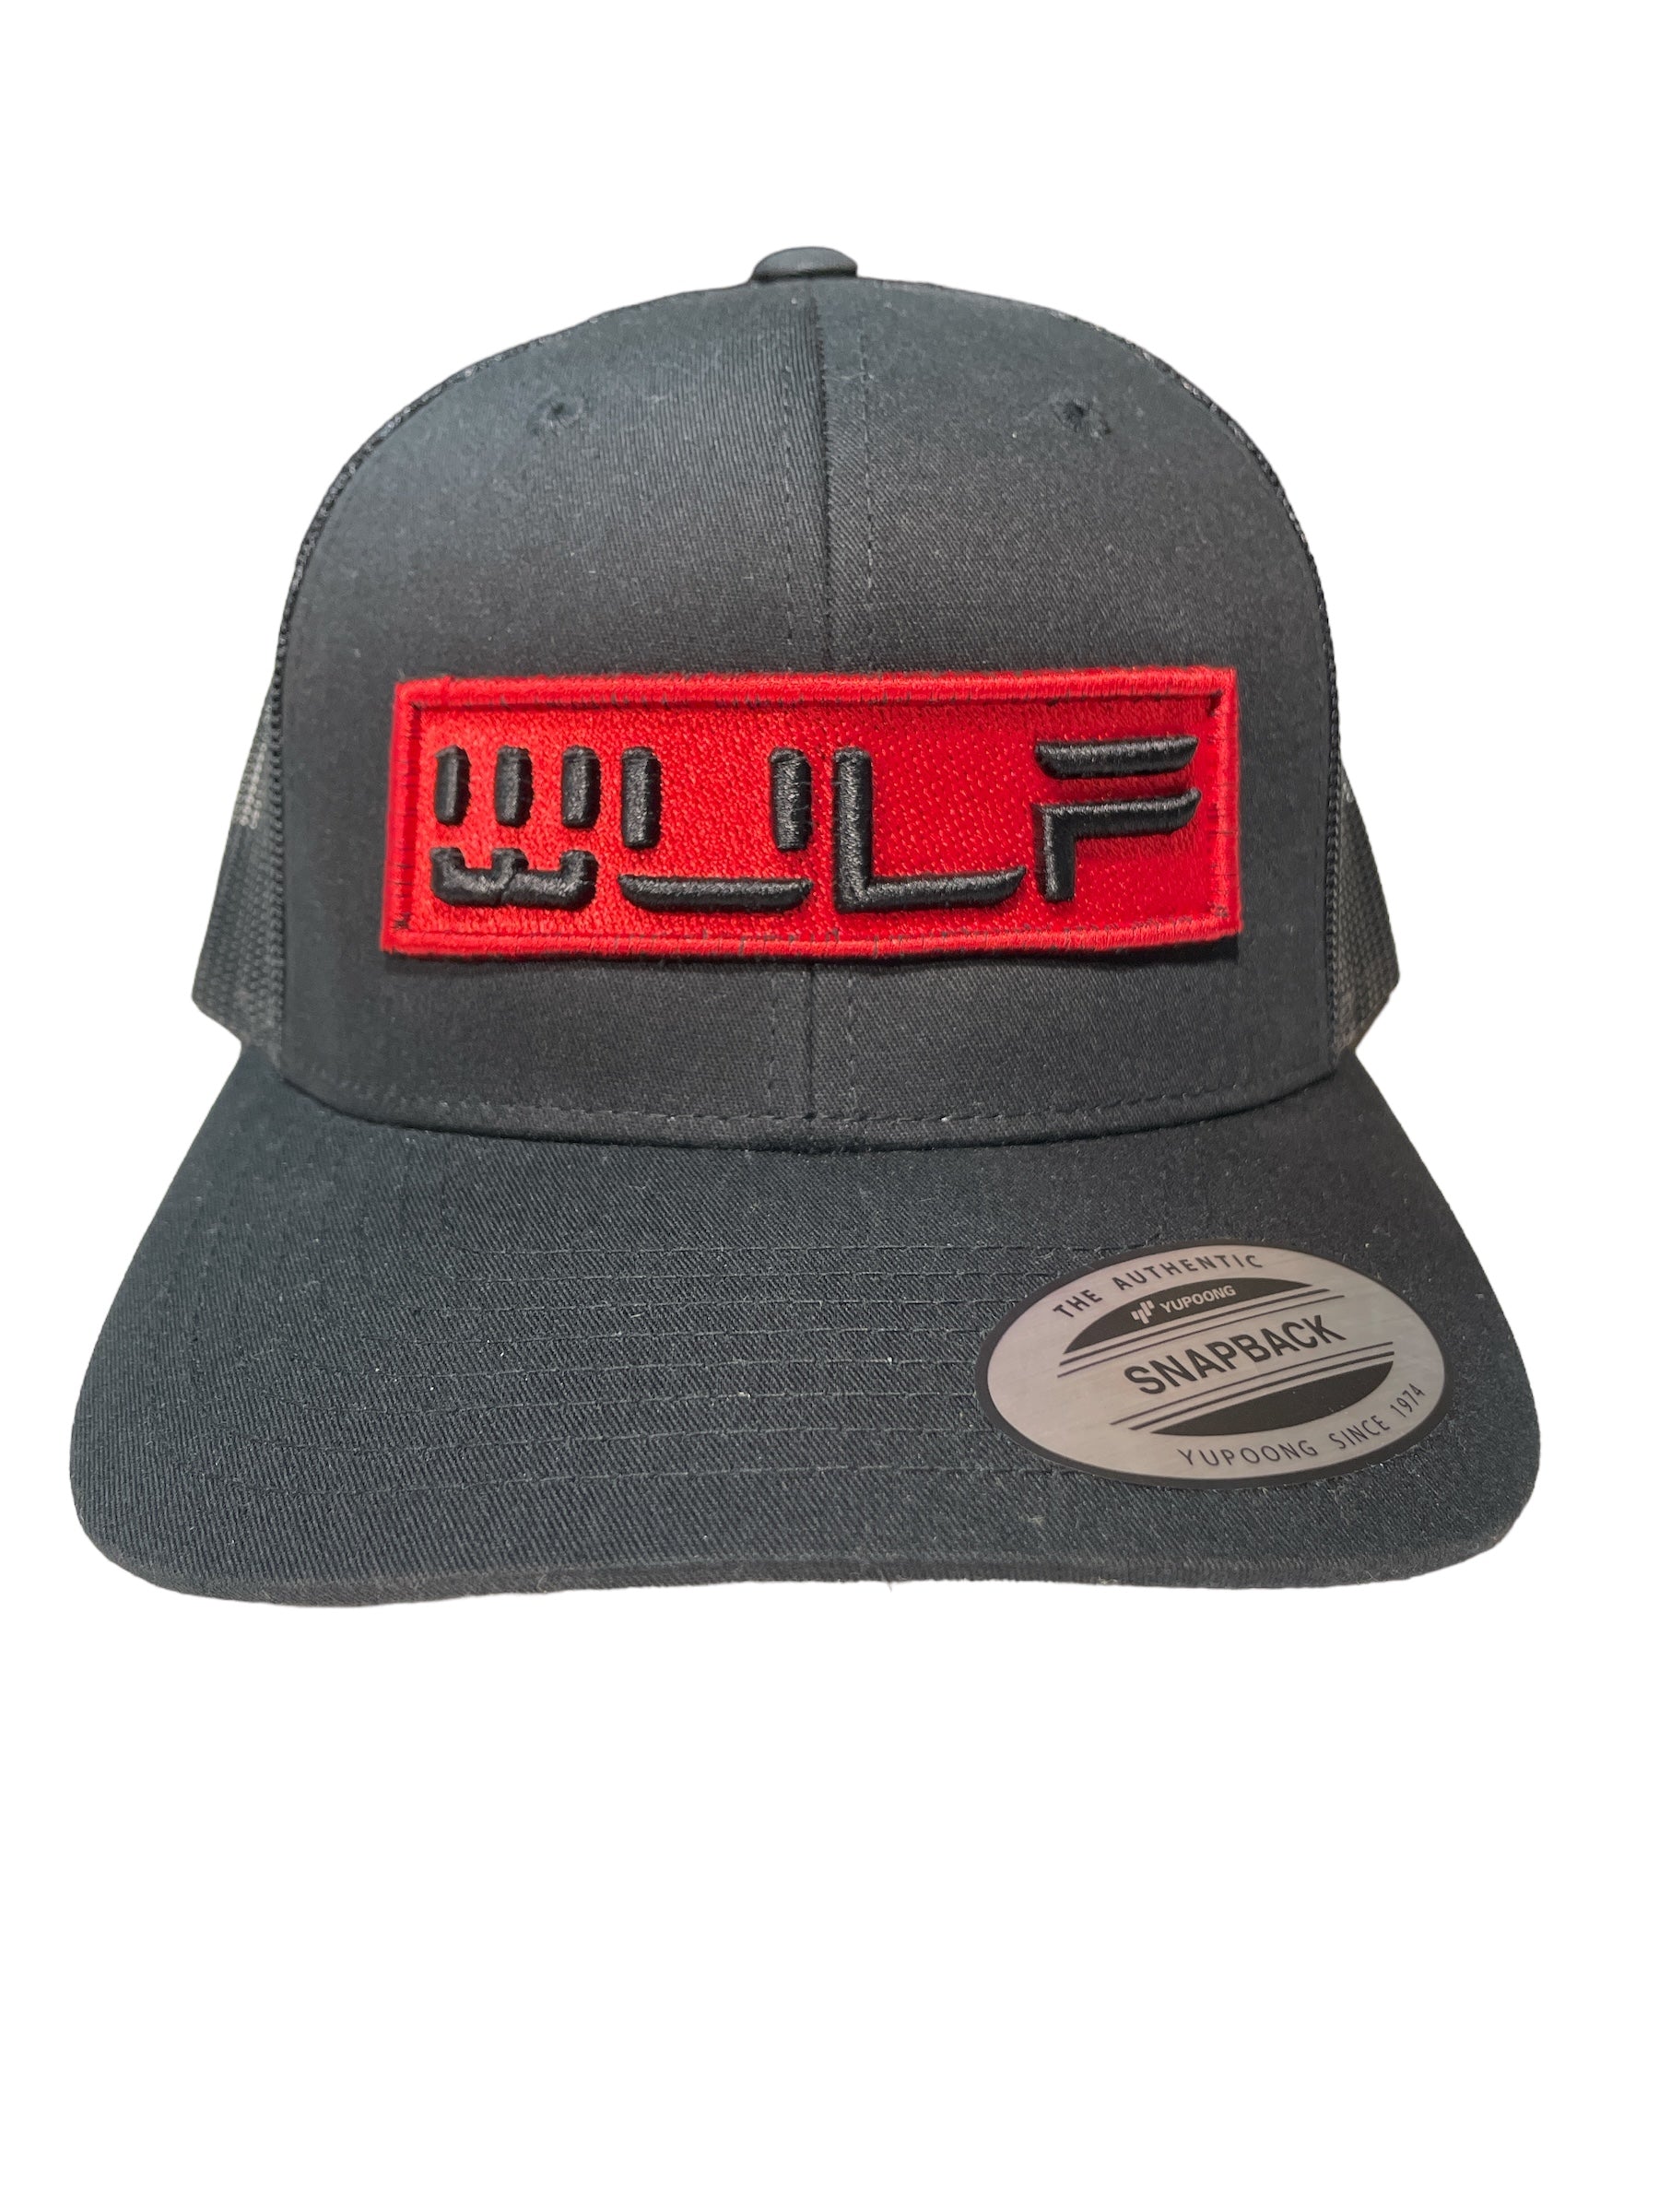 Black with Red Logo - Snapback